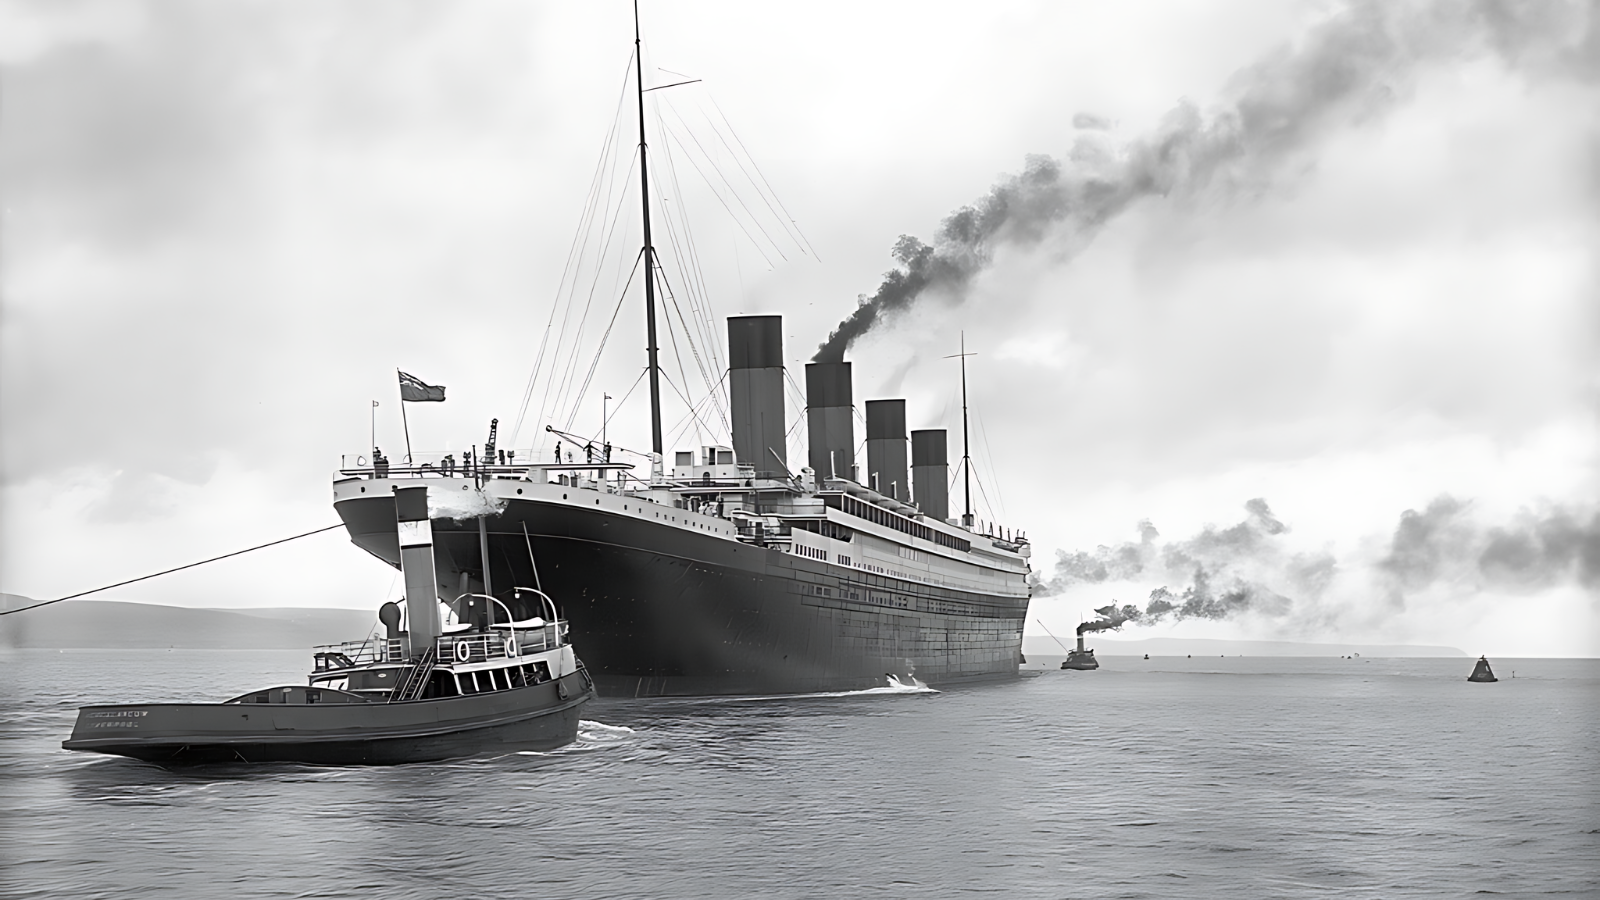 Titanic departing Belfast for sea trials on 2 April 1912